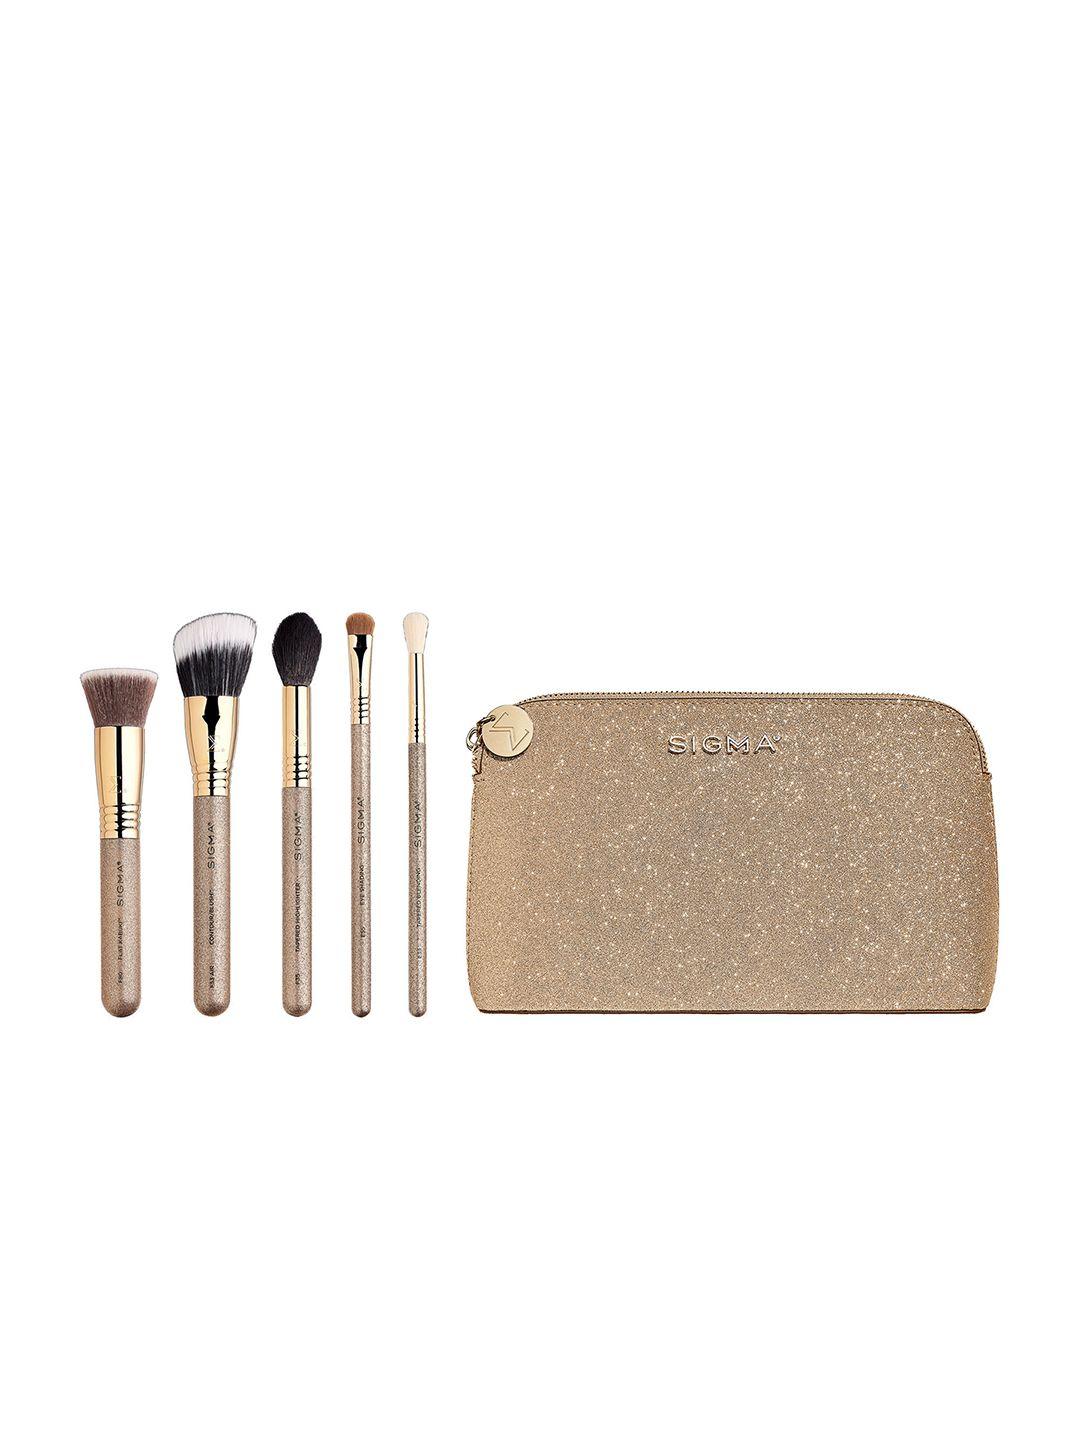 sigma beauty radiant glow brush set with pouch - gold toned